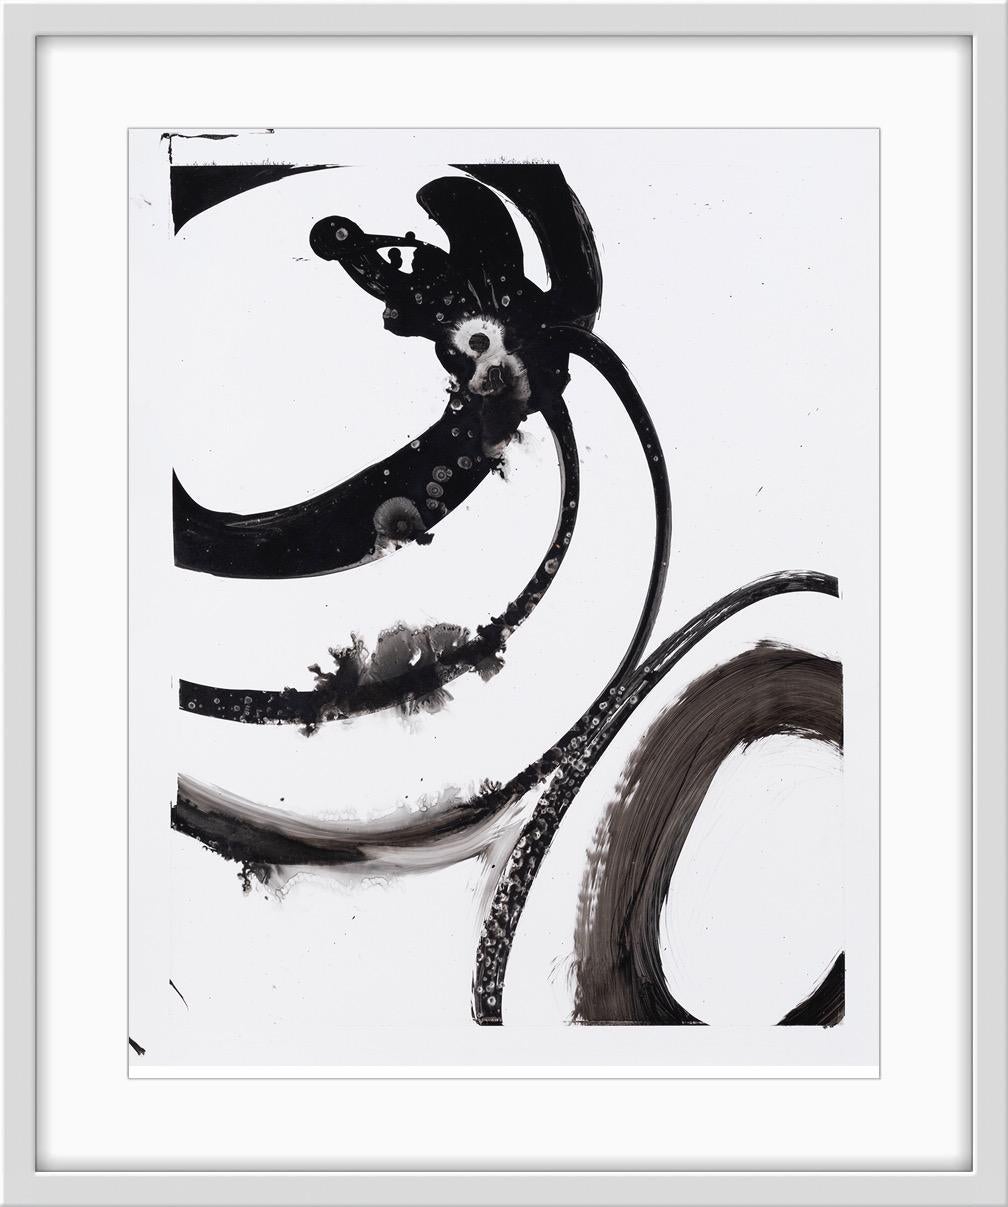 Black and white contemporary abstract painting by Christopher Rico - ink on Yupo paper. Offered unframed.

For this black and white series of paintings, Rico uses oversized calligraphy brushes on Yupo paper. He lays out long sheets on the floor and